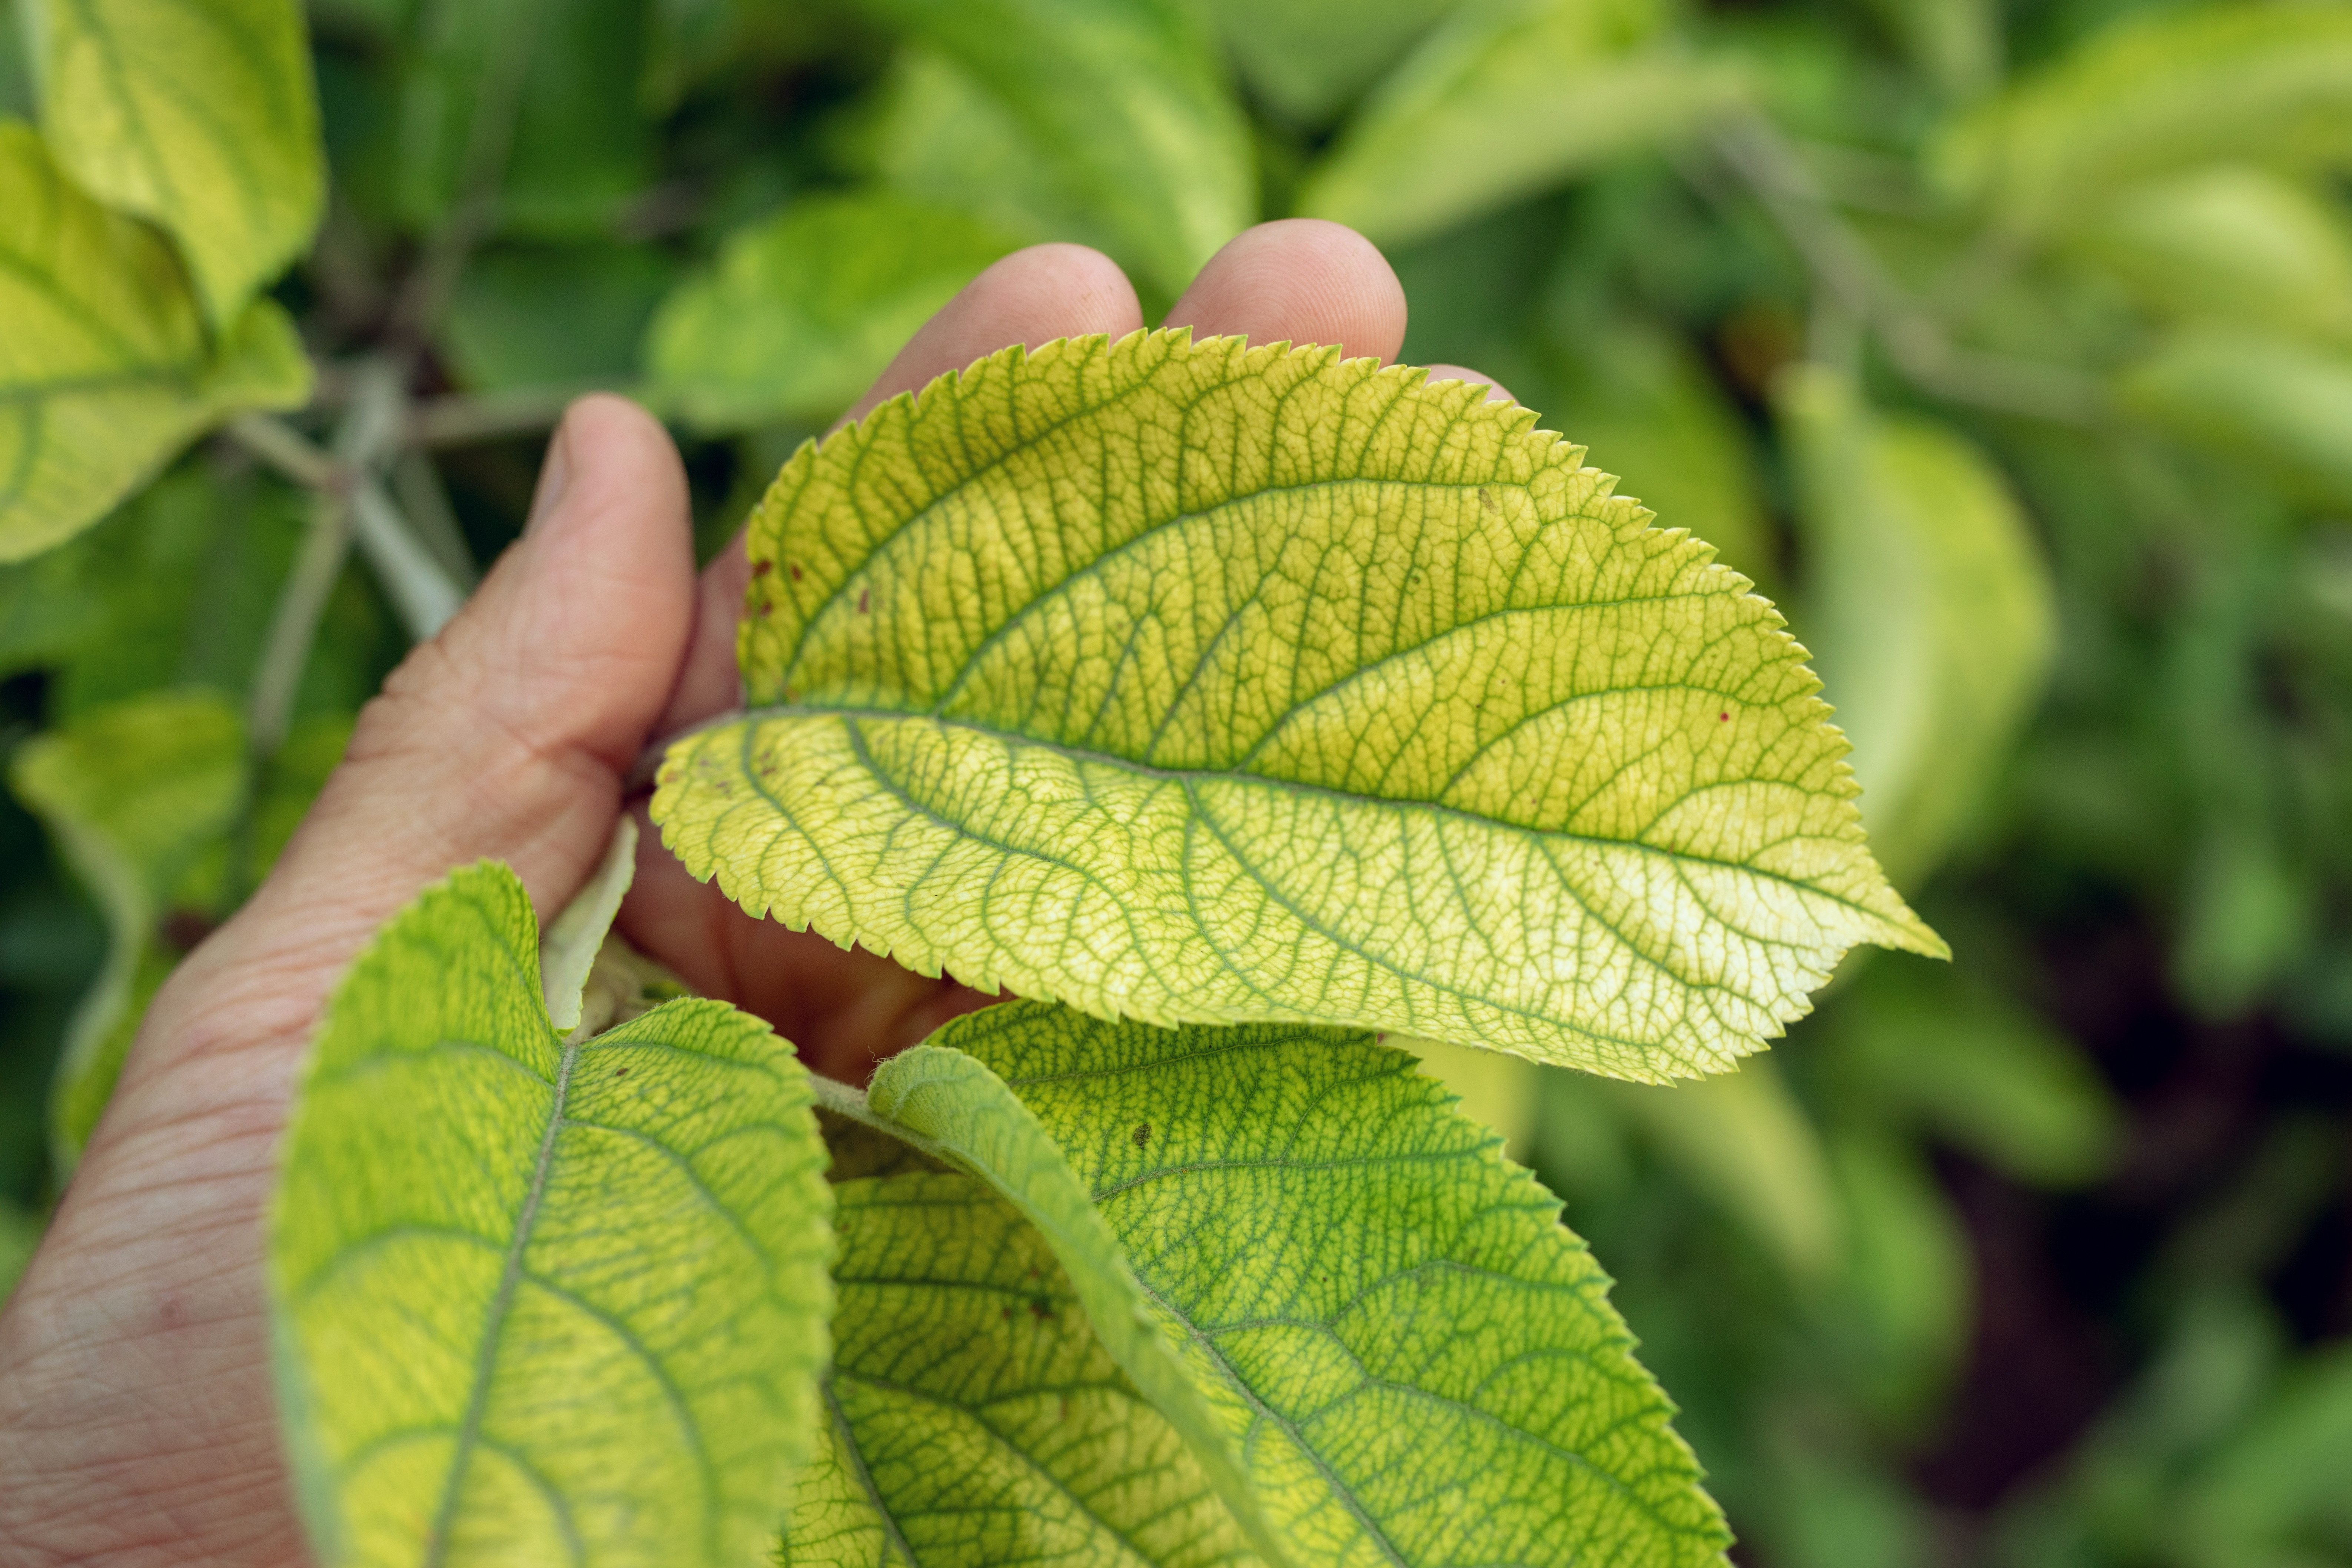 Interveinal chlorosis is a common symptom of an iron deficiency